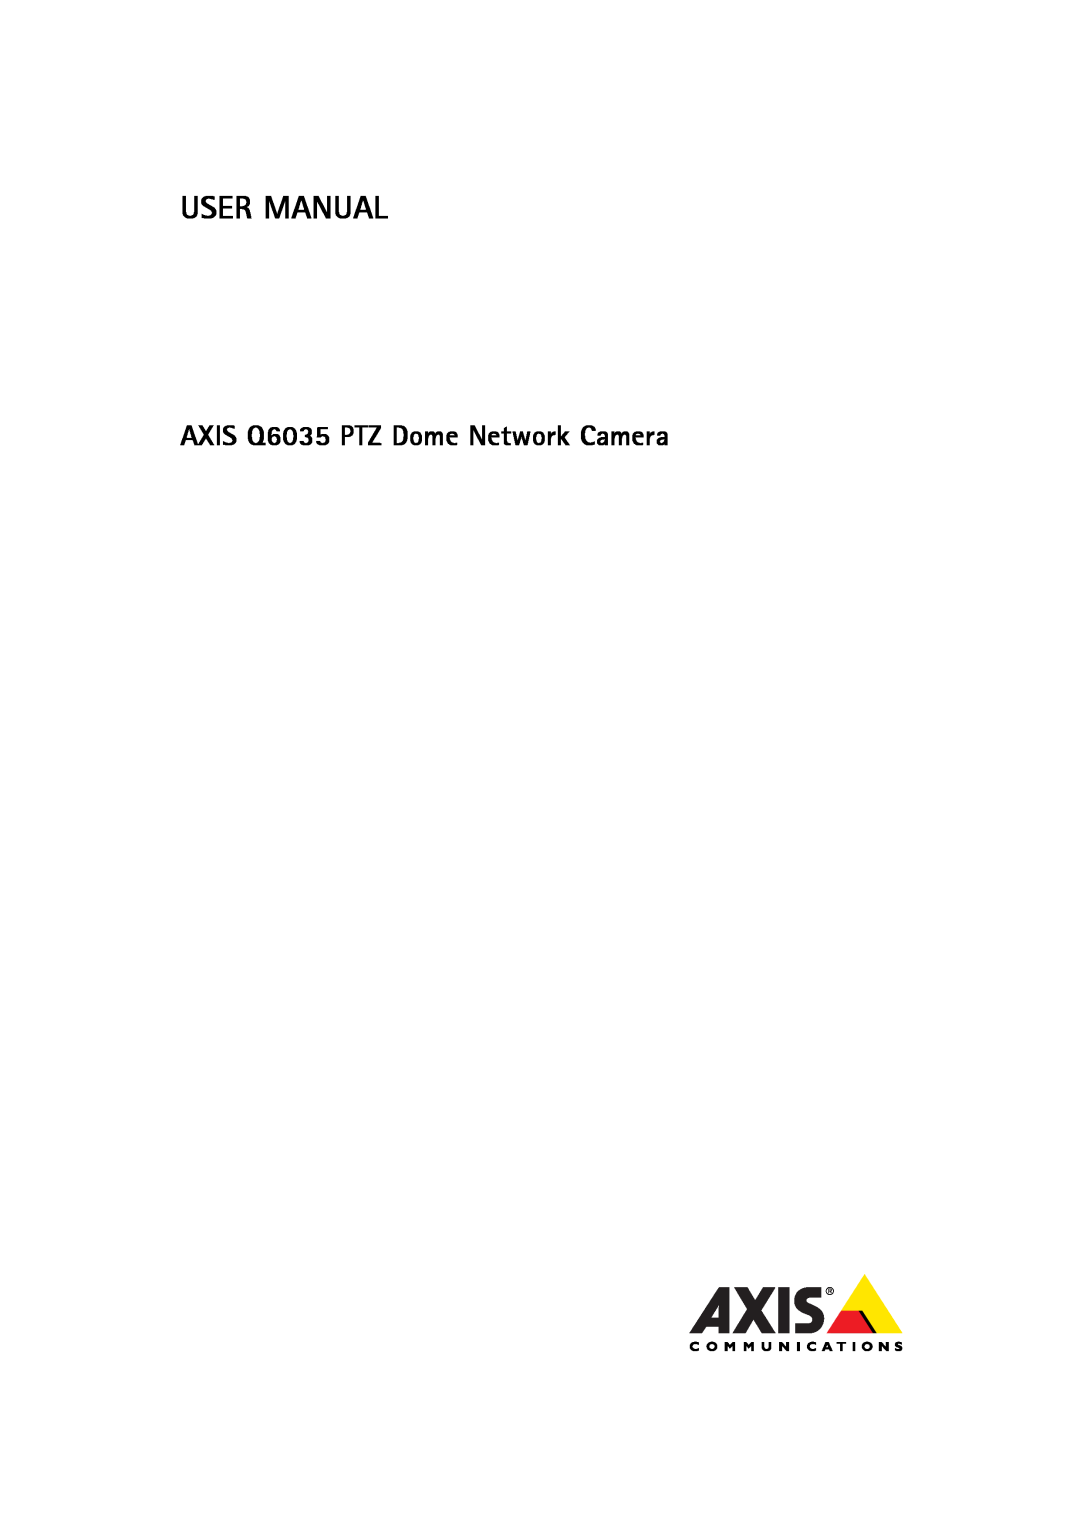 Axis Communications axis communications dome network camera user manual User Manual, AXIS Q6035 PTZ Dome Network Camera 